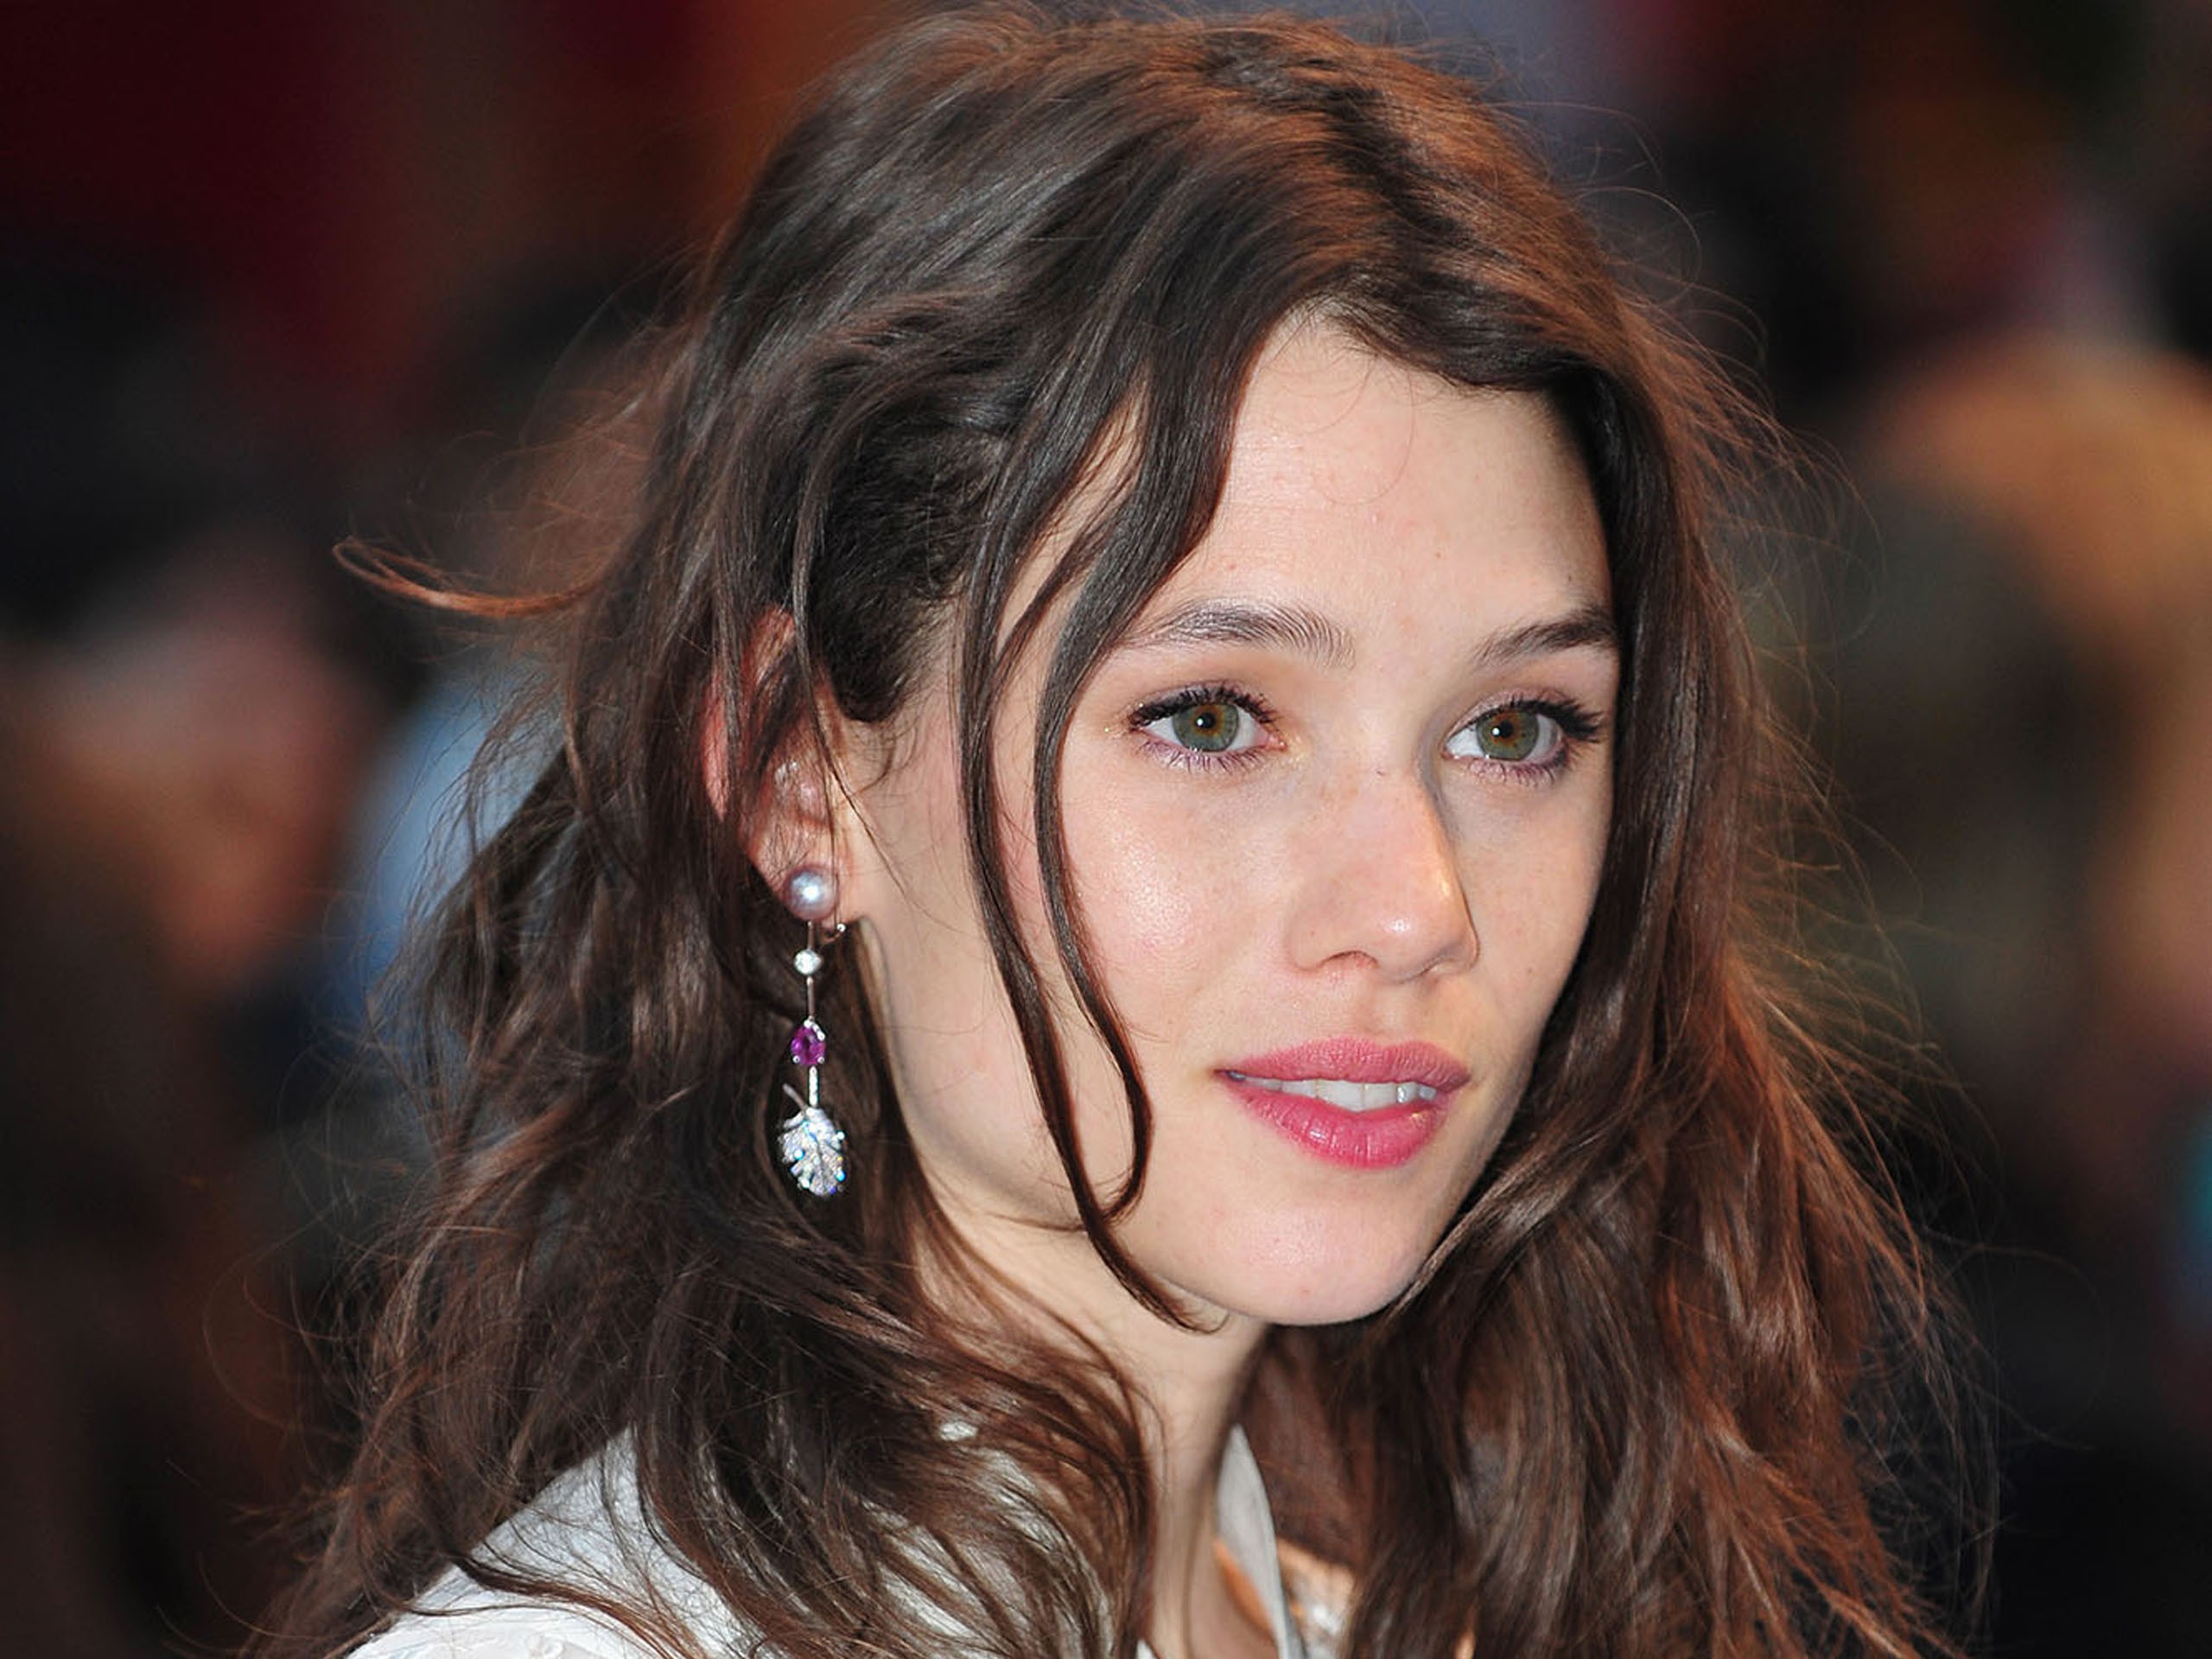 Astrid Berges-Frisbey Profile, BioData, Updates and Latest Pictures ...